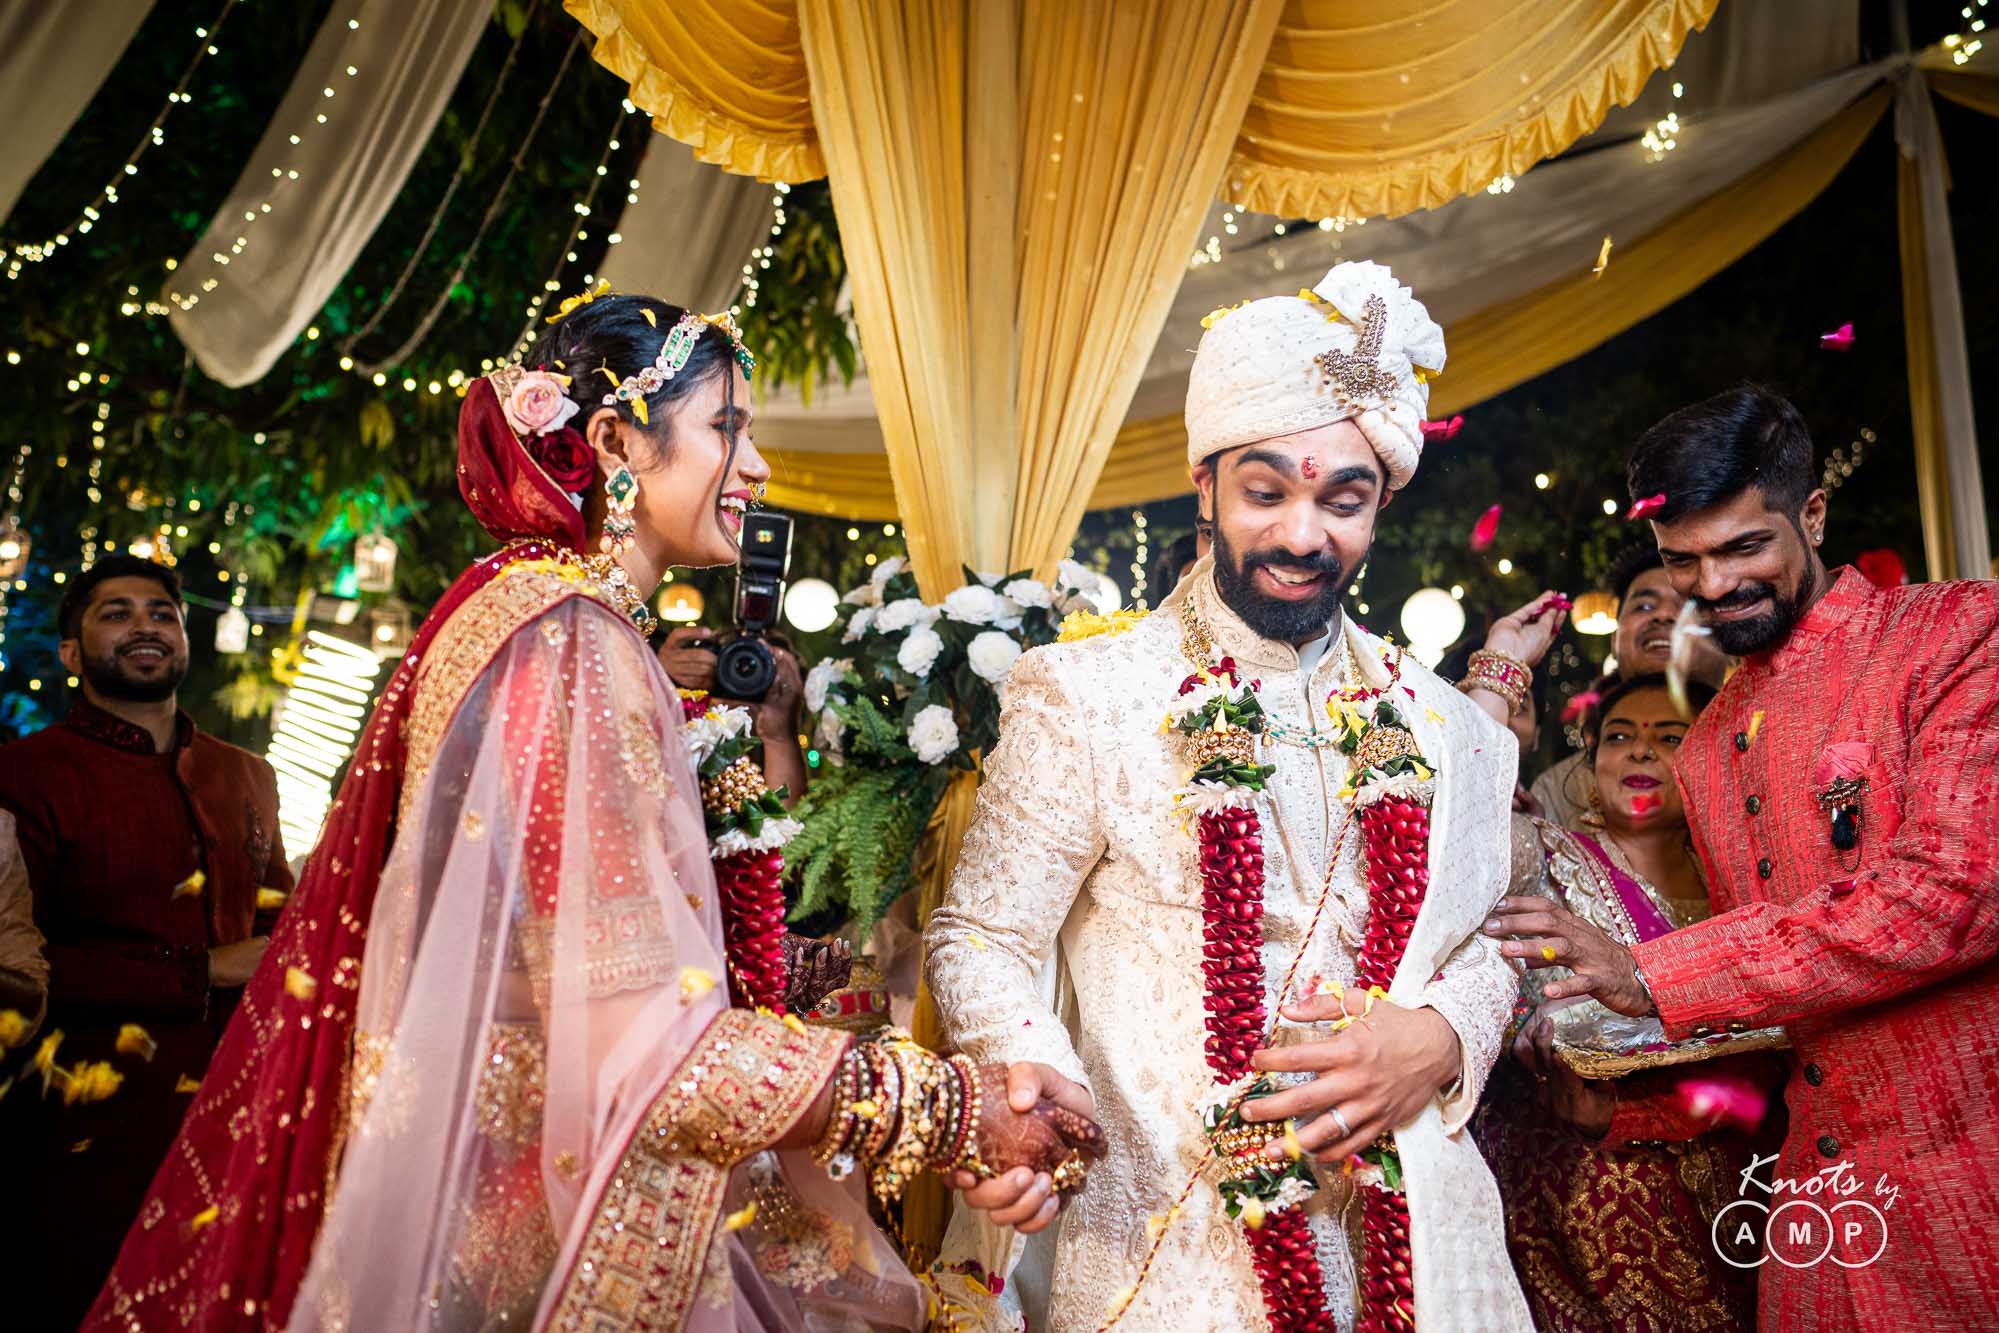 Gujrati-Wedding-at-Blossoms-Lawns-Andheri-East-59-of-62